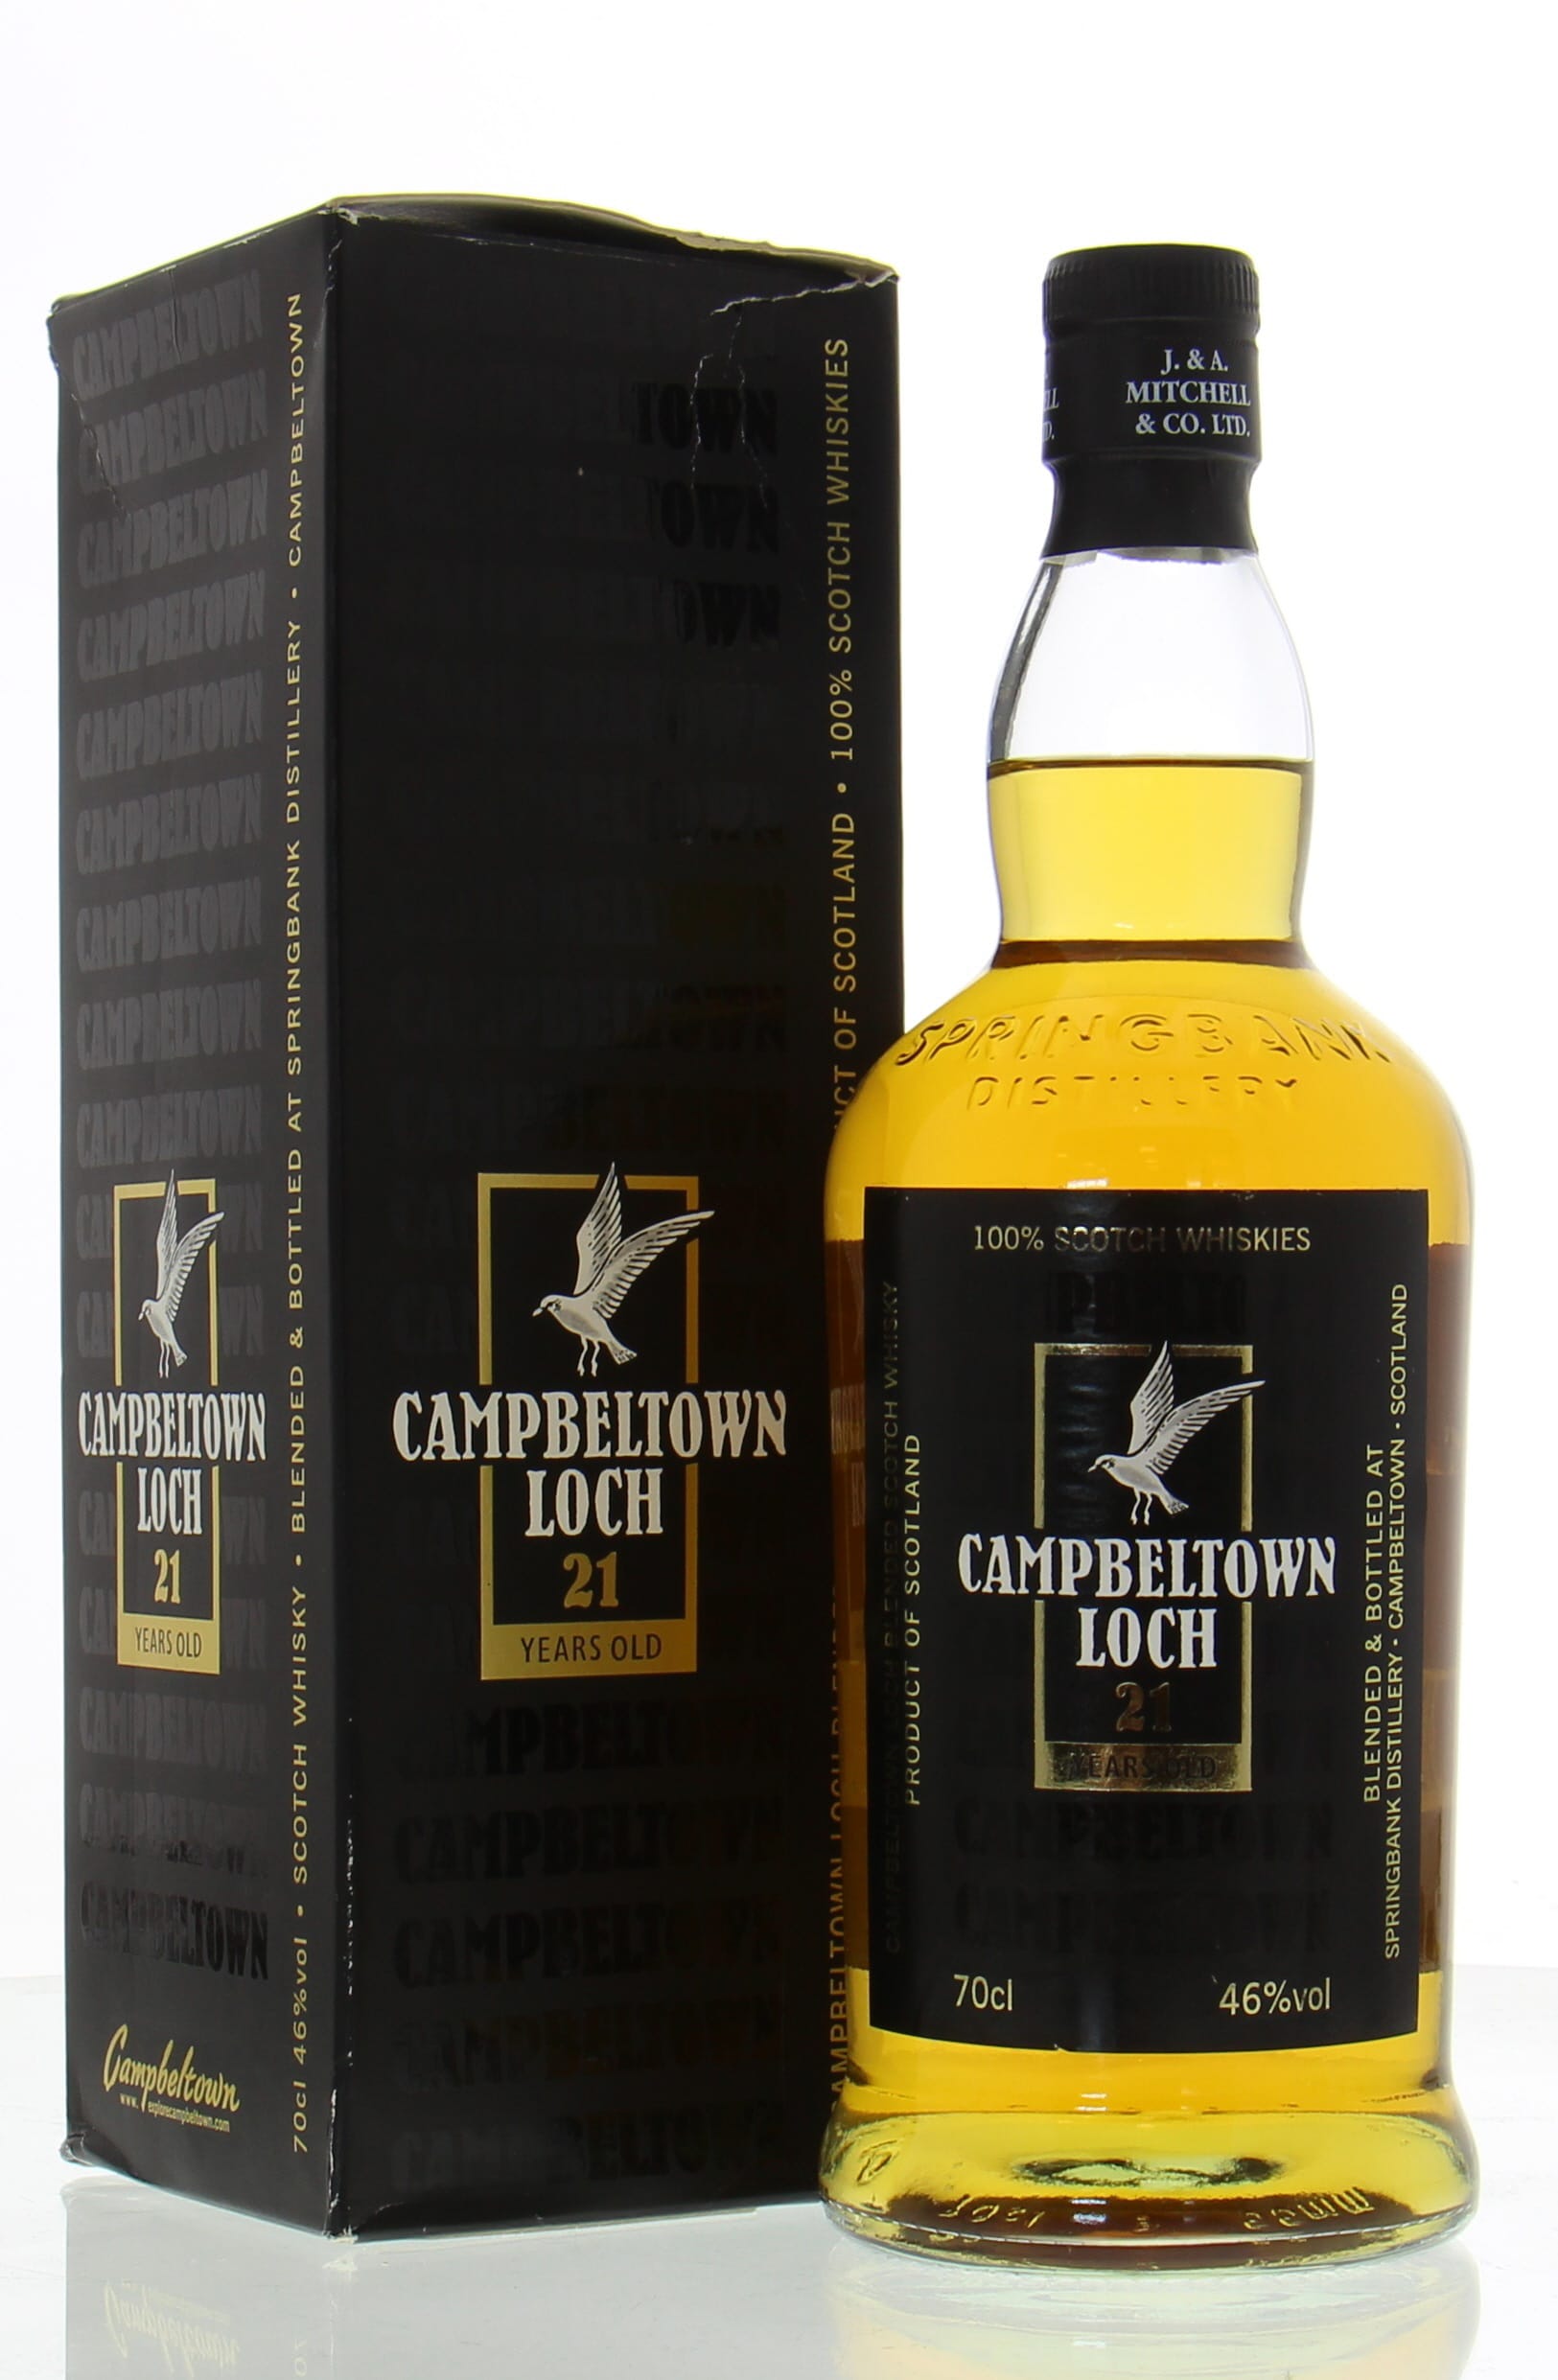 Springbank - Campbeltown Loch 21 Years old 46% NV Perfect